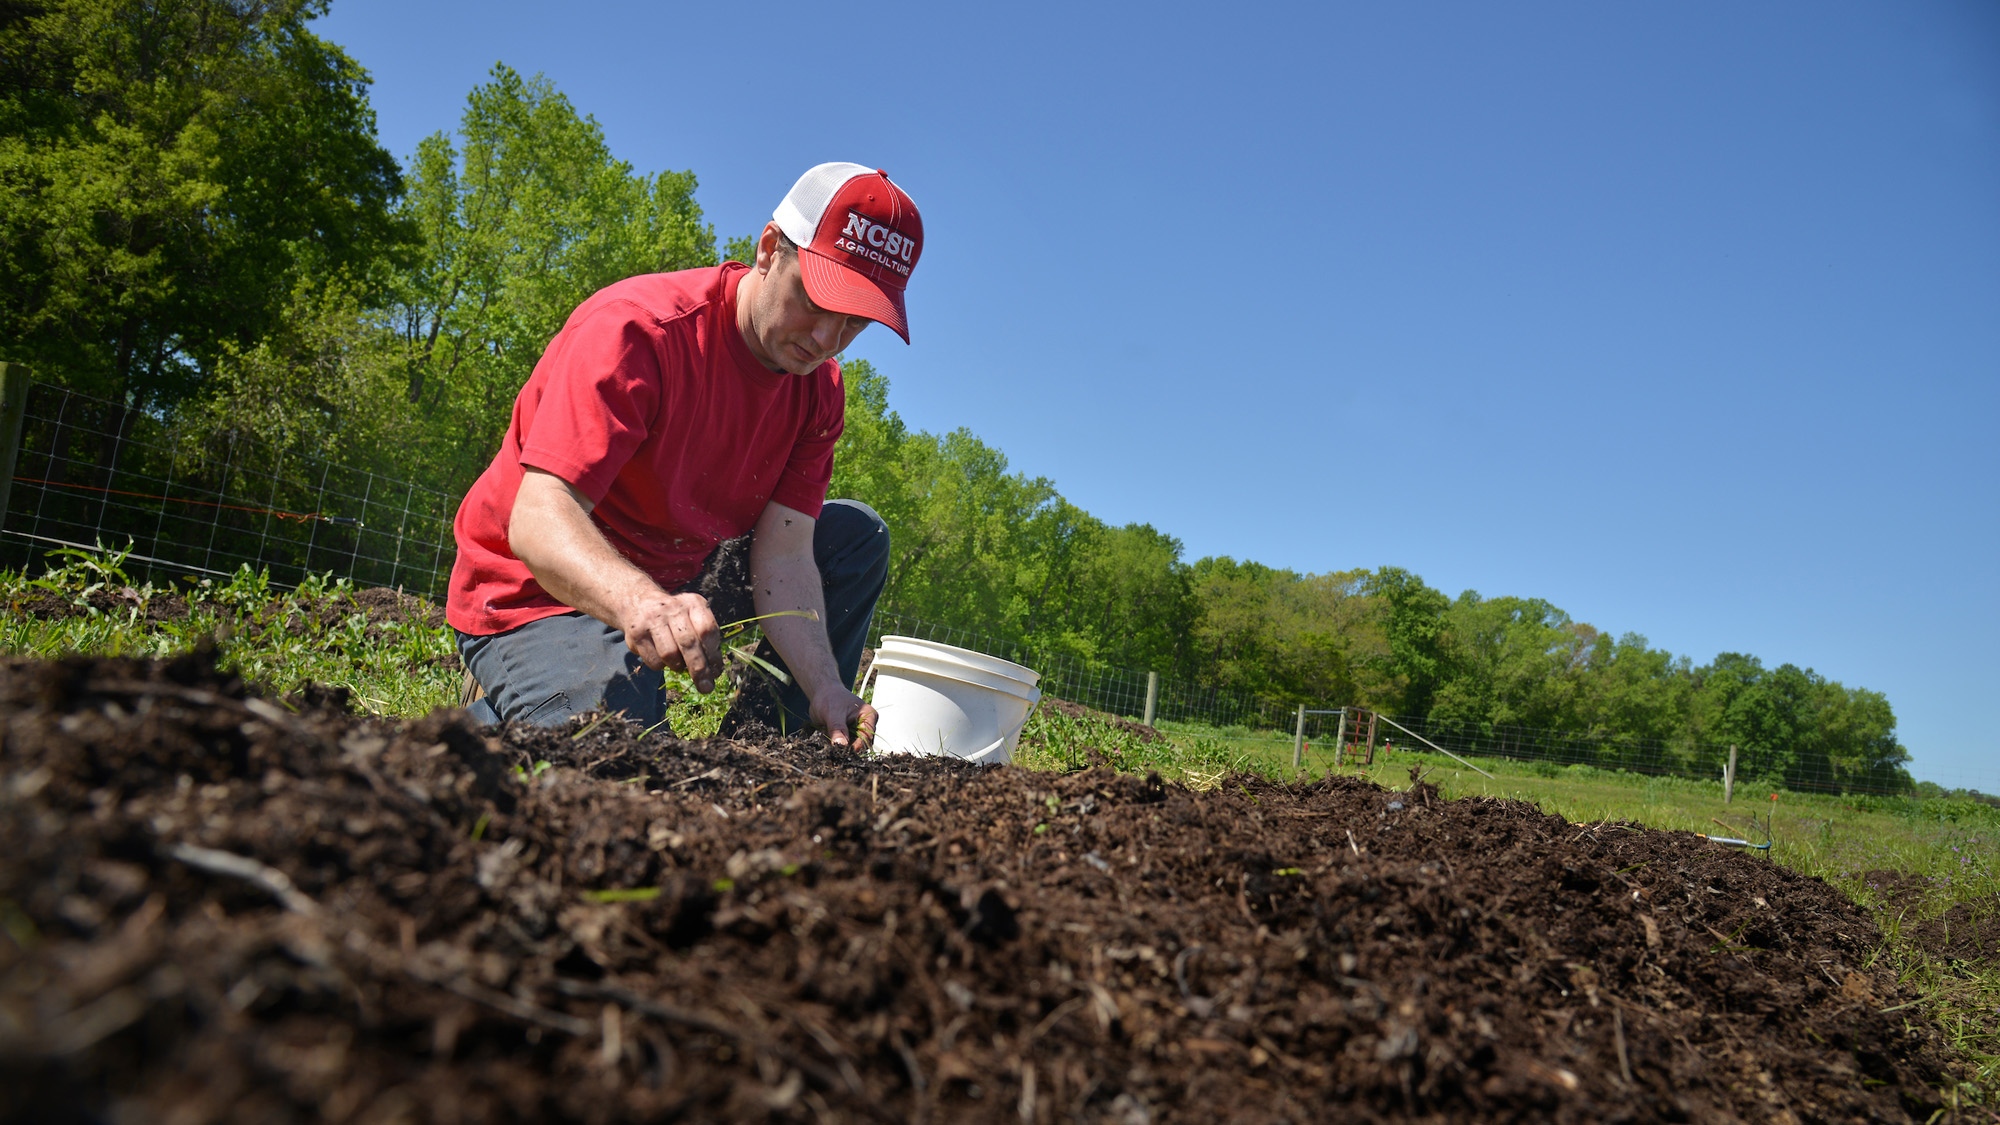 A soil sciences student works the soil in his section of garden at North Carolina State University's Agroecology Farm.